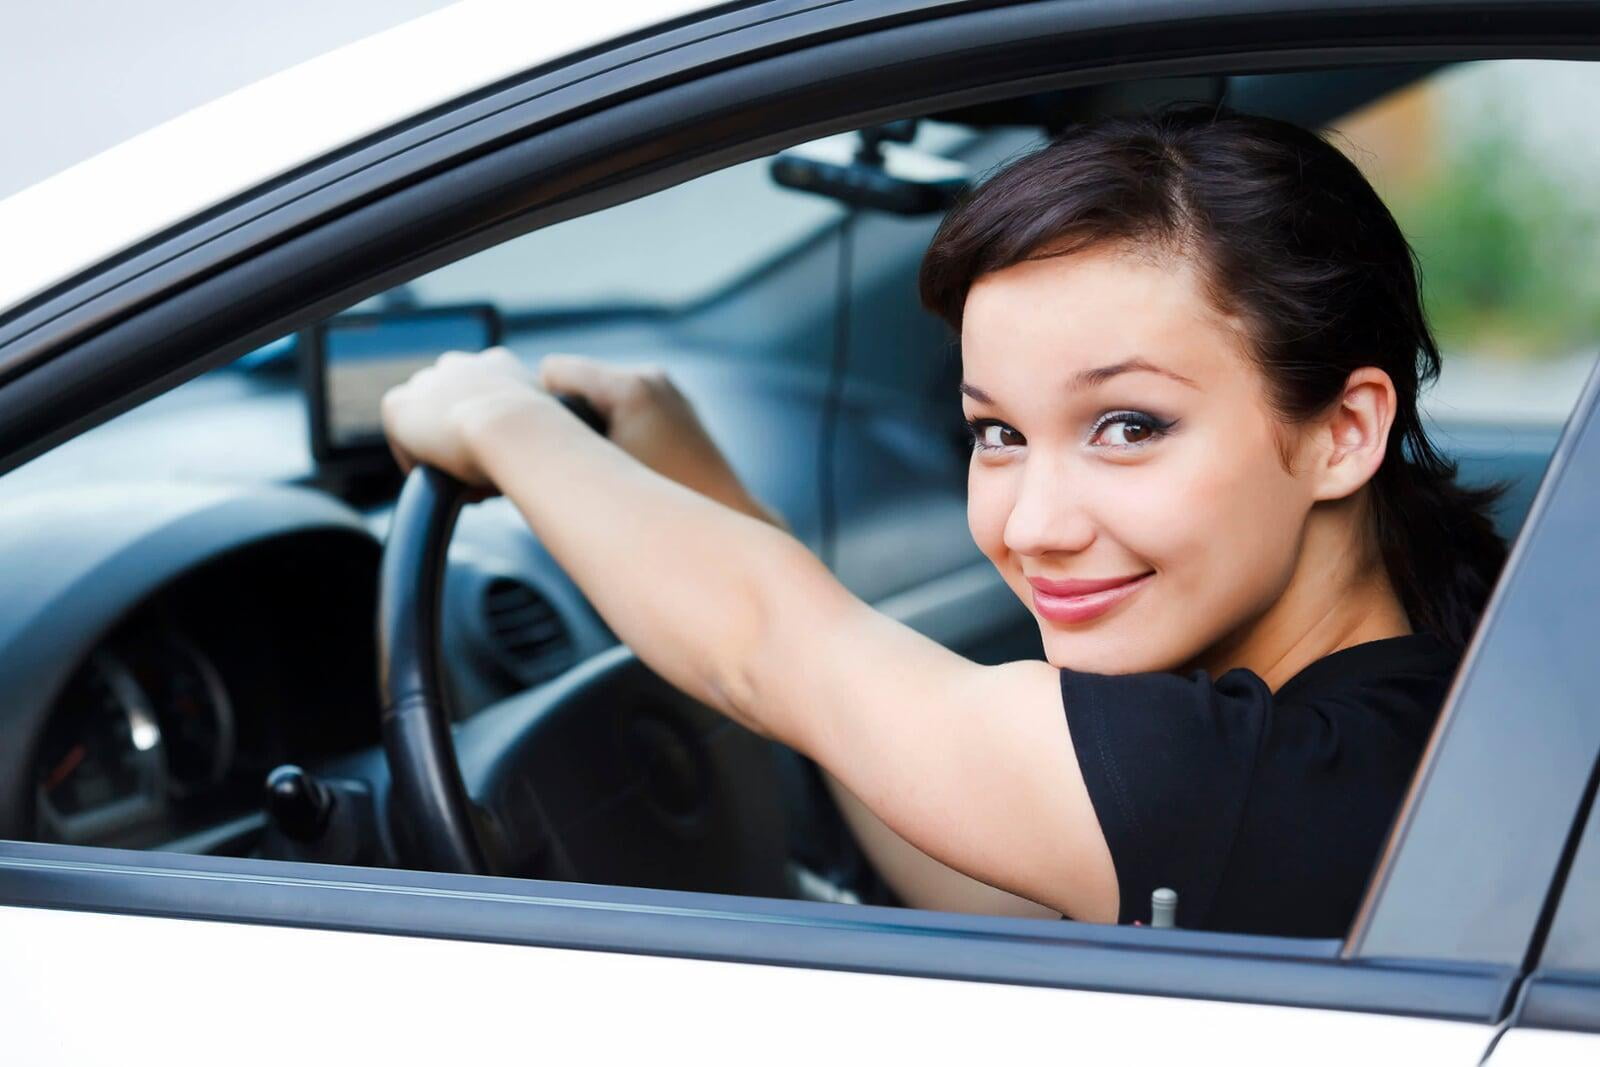 Some Things To Consider When Your Teen Starts Driving